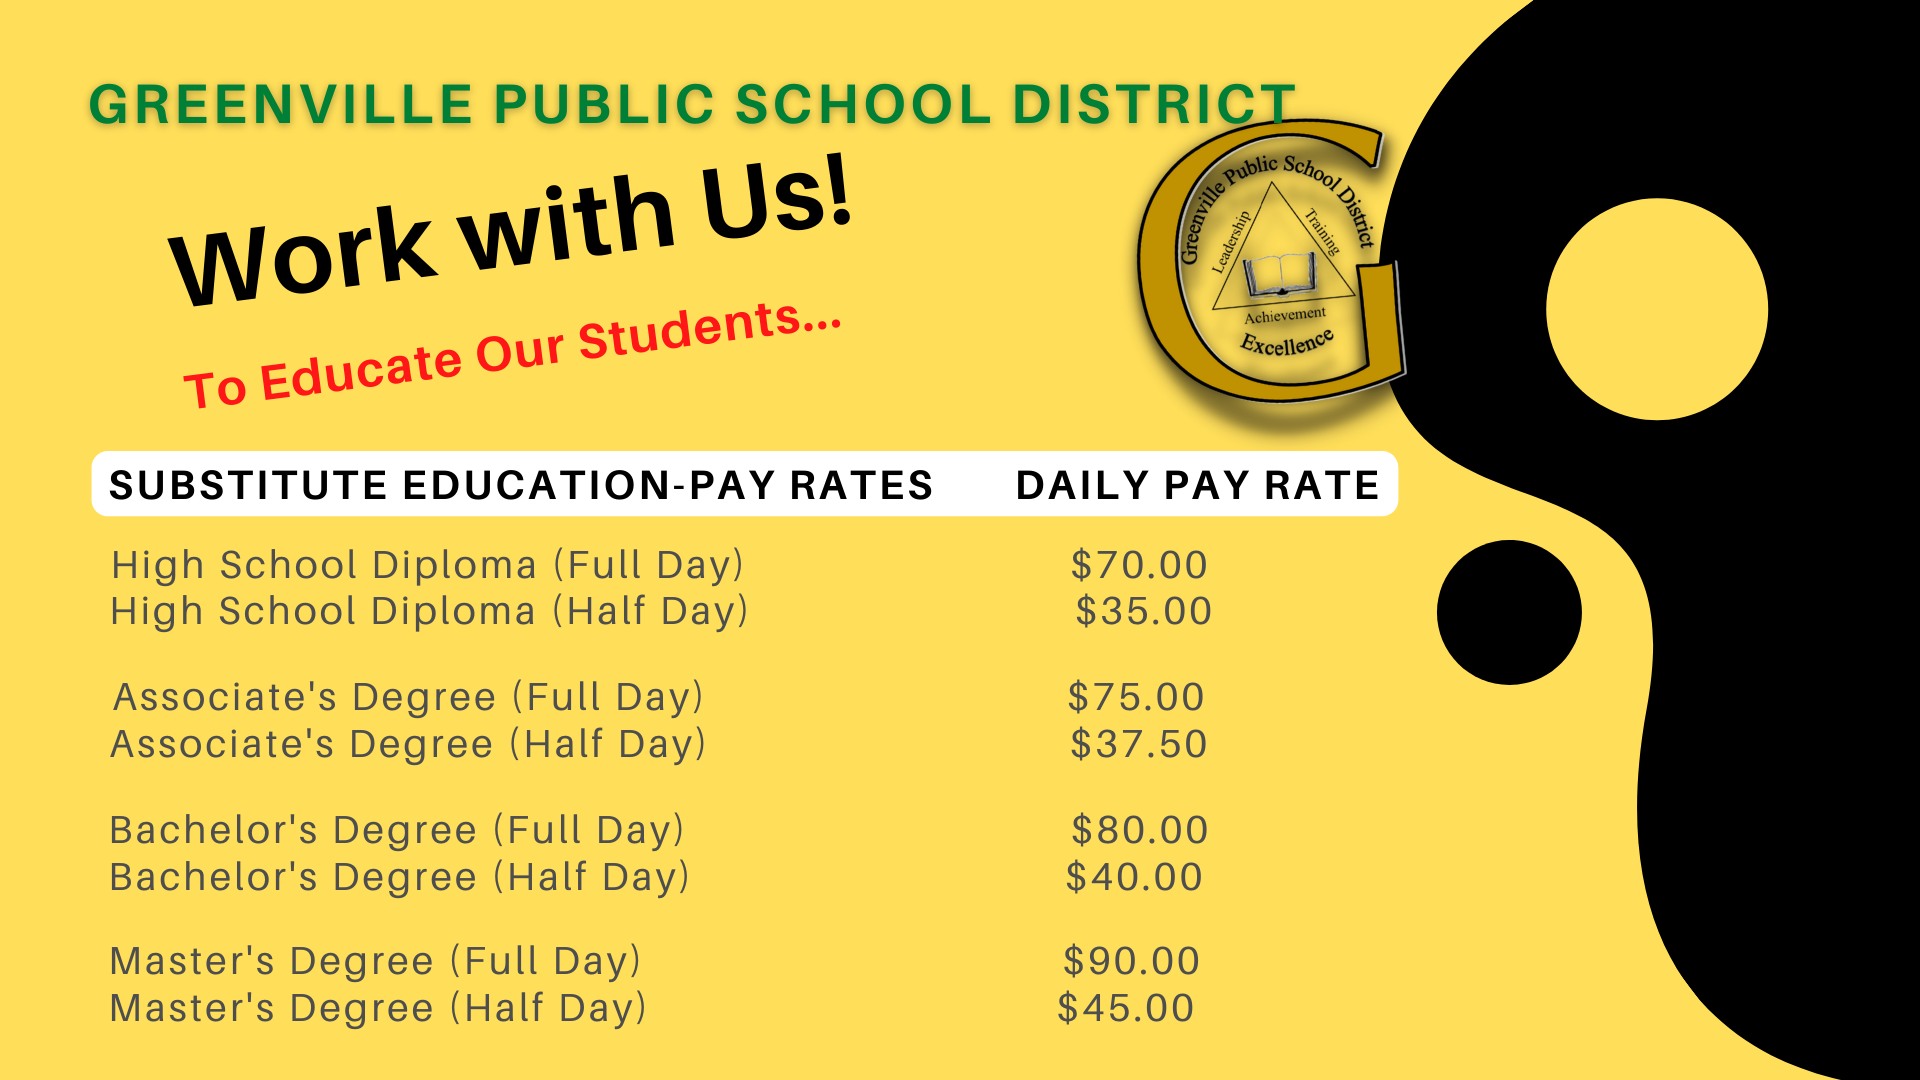 Substitute Education-Pay Rates